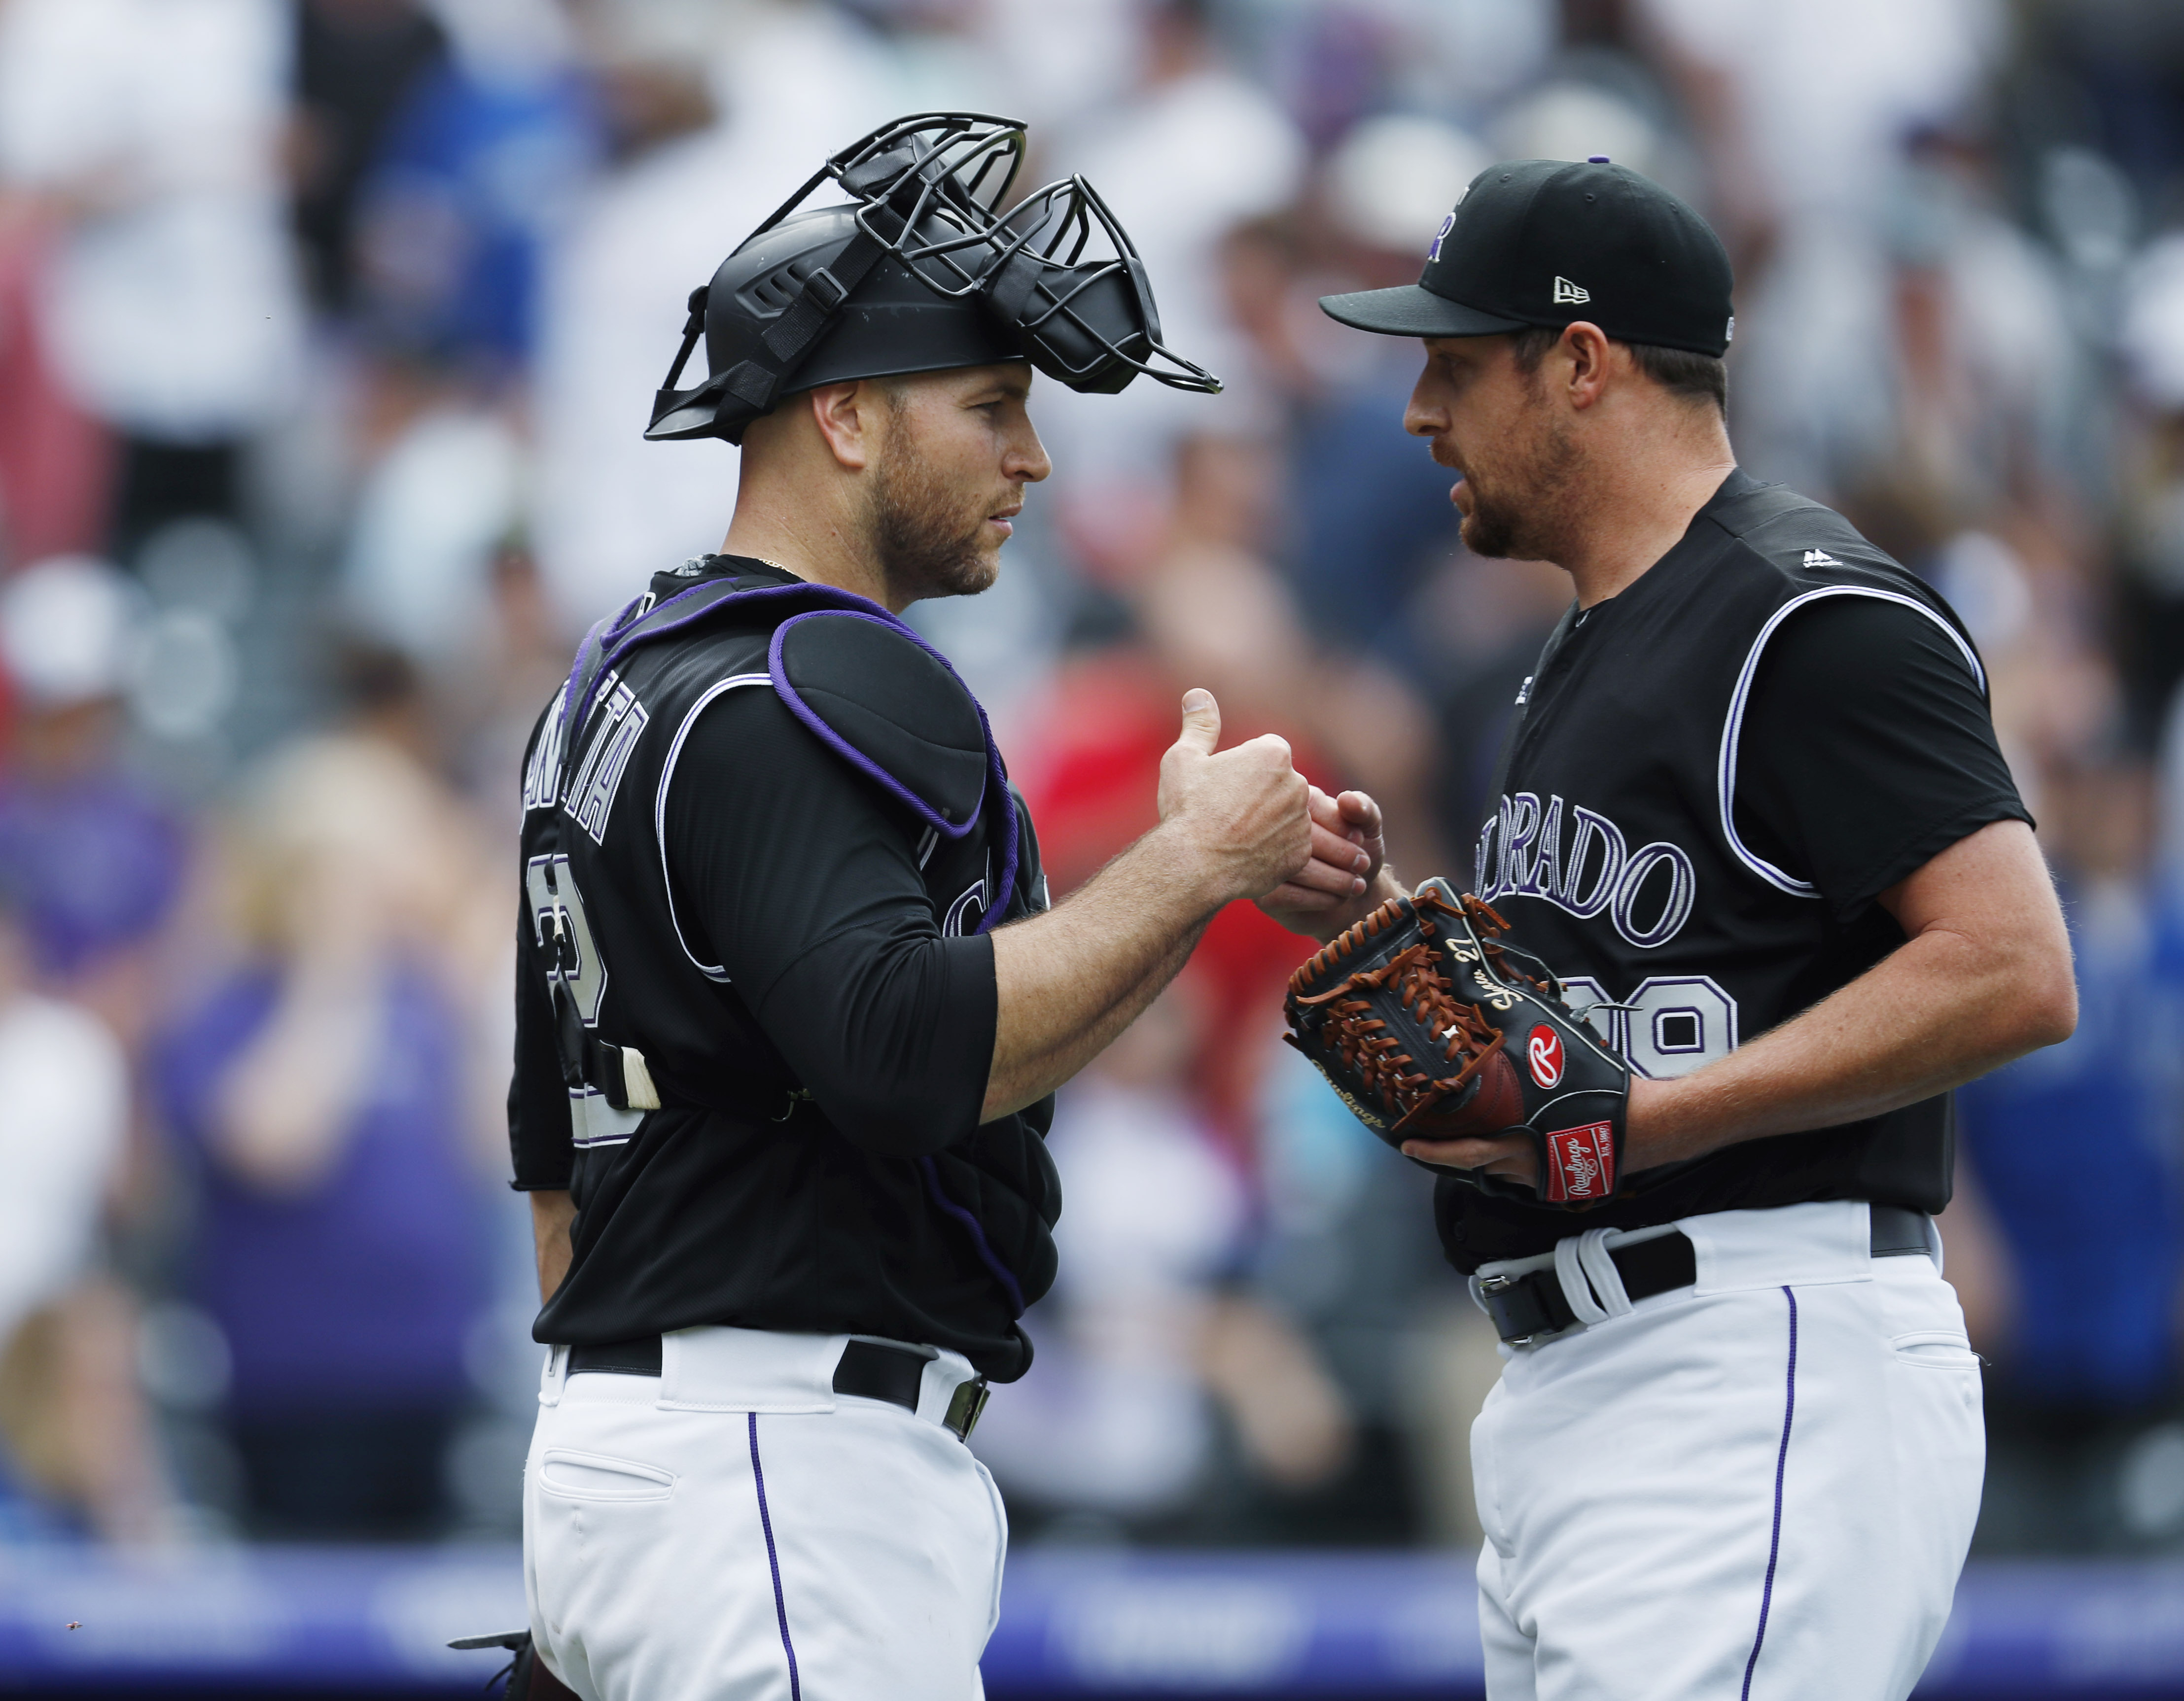 Rockies beat Blue Jays 5-1 for 8th straight win